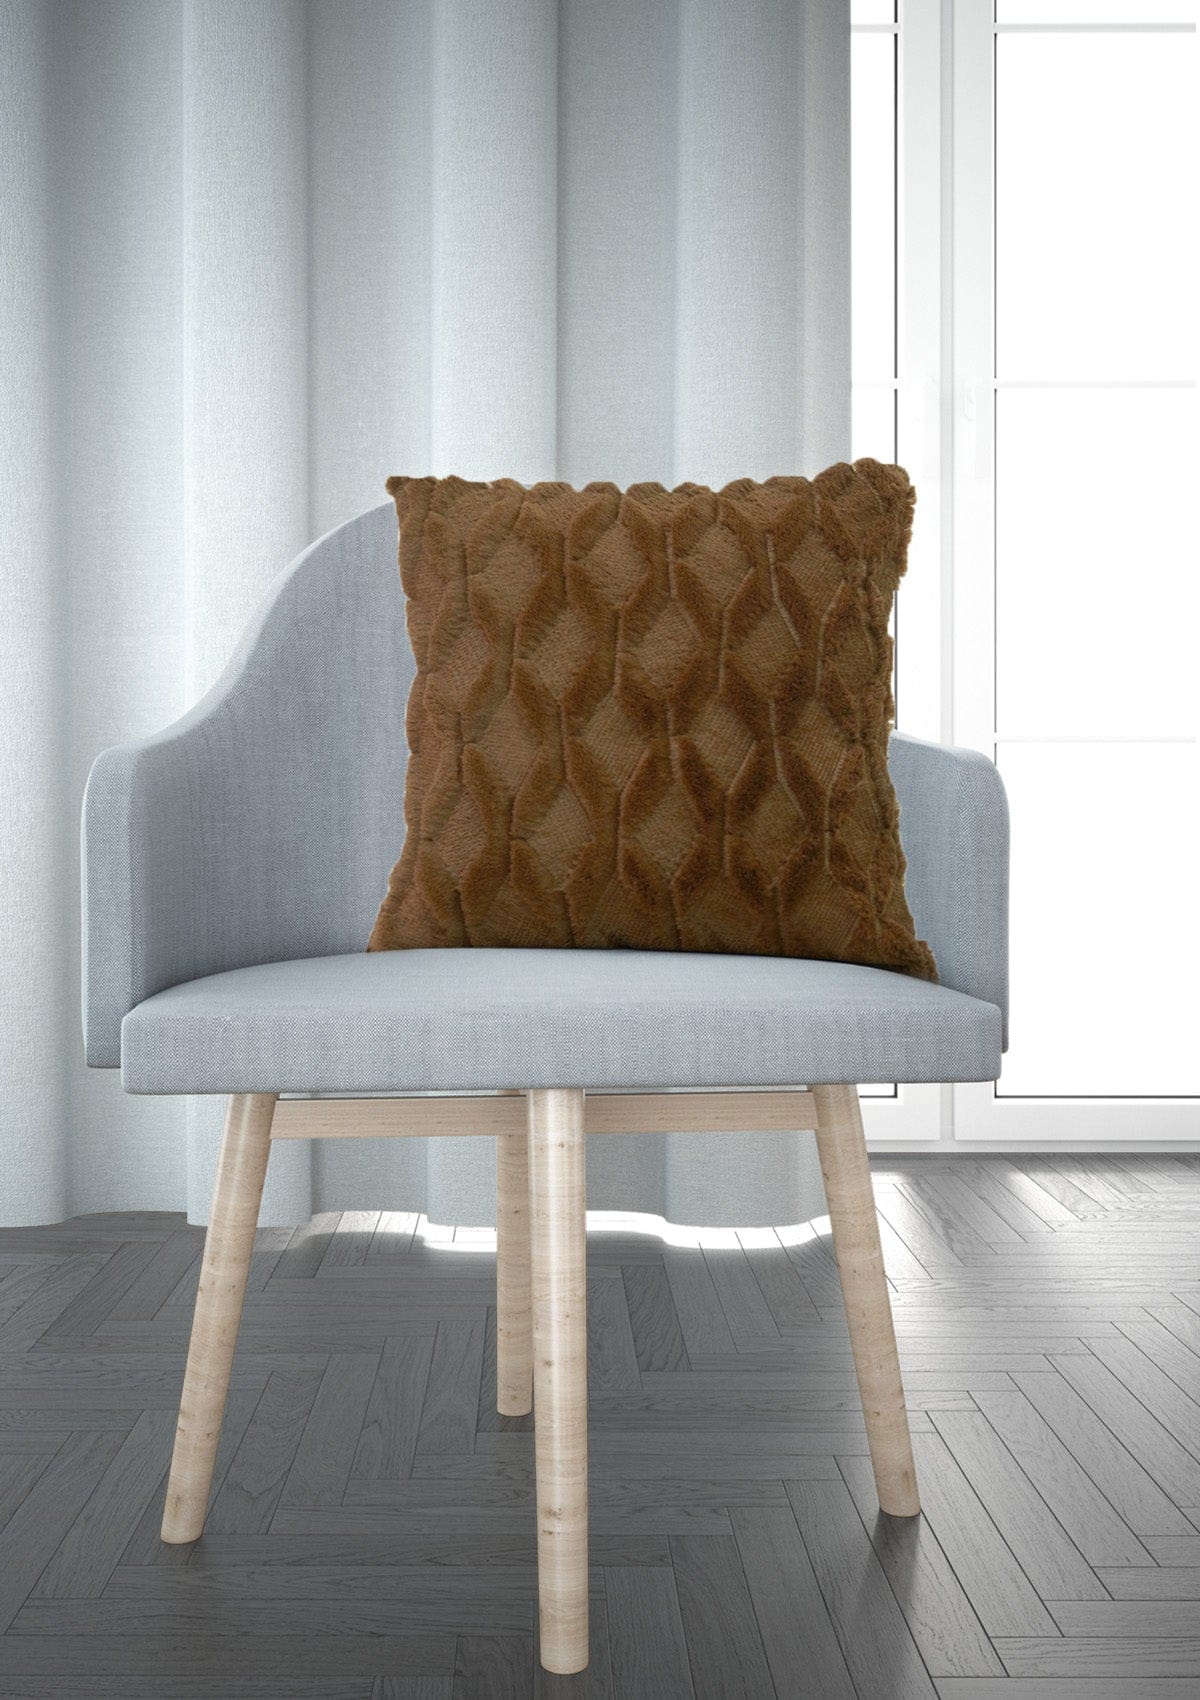 Warm Brown Fluffy Cushion Covers | CovermyCushion 30x50cm / Brown / No thanks - cover only